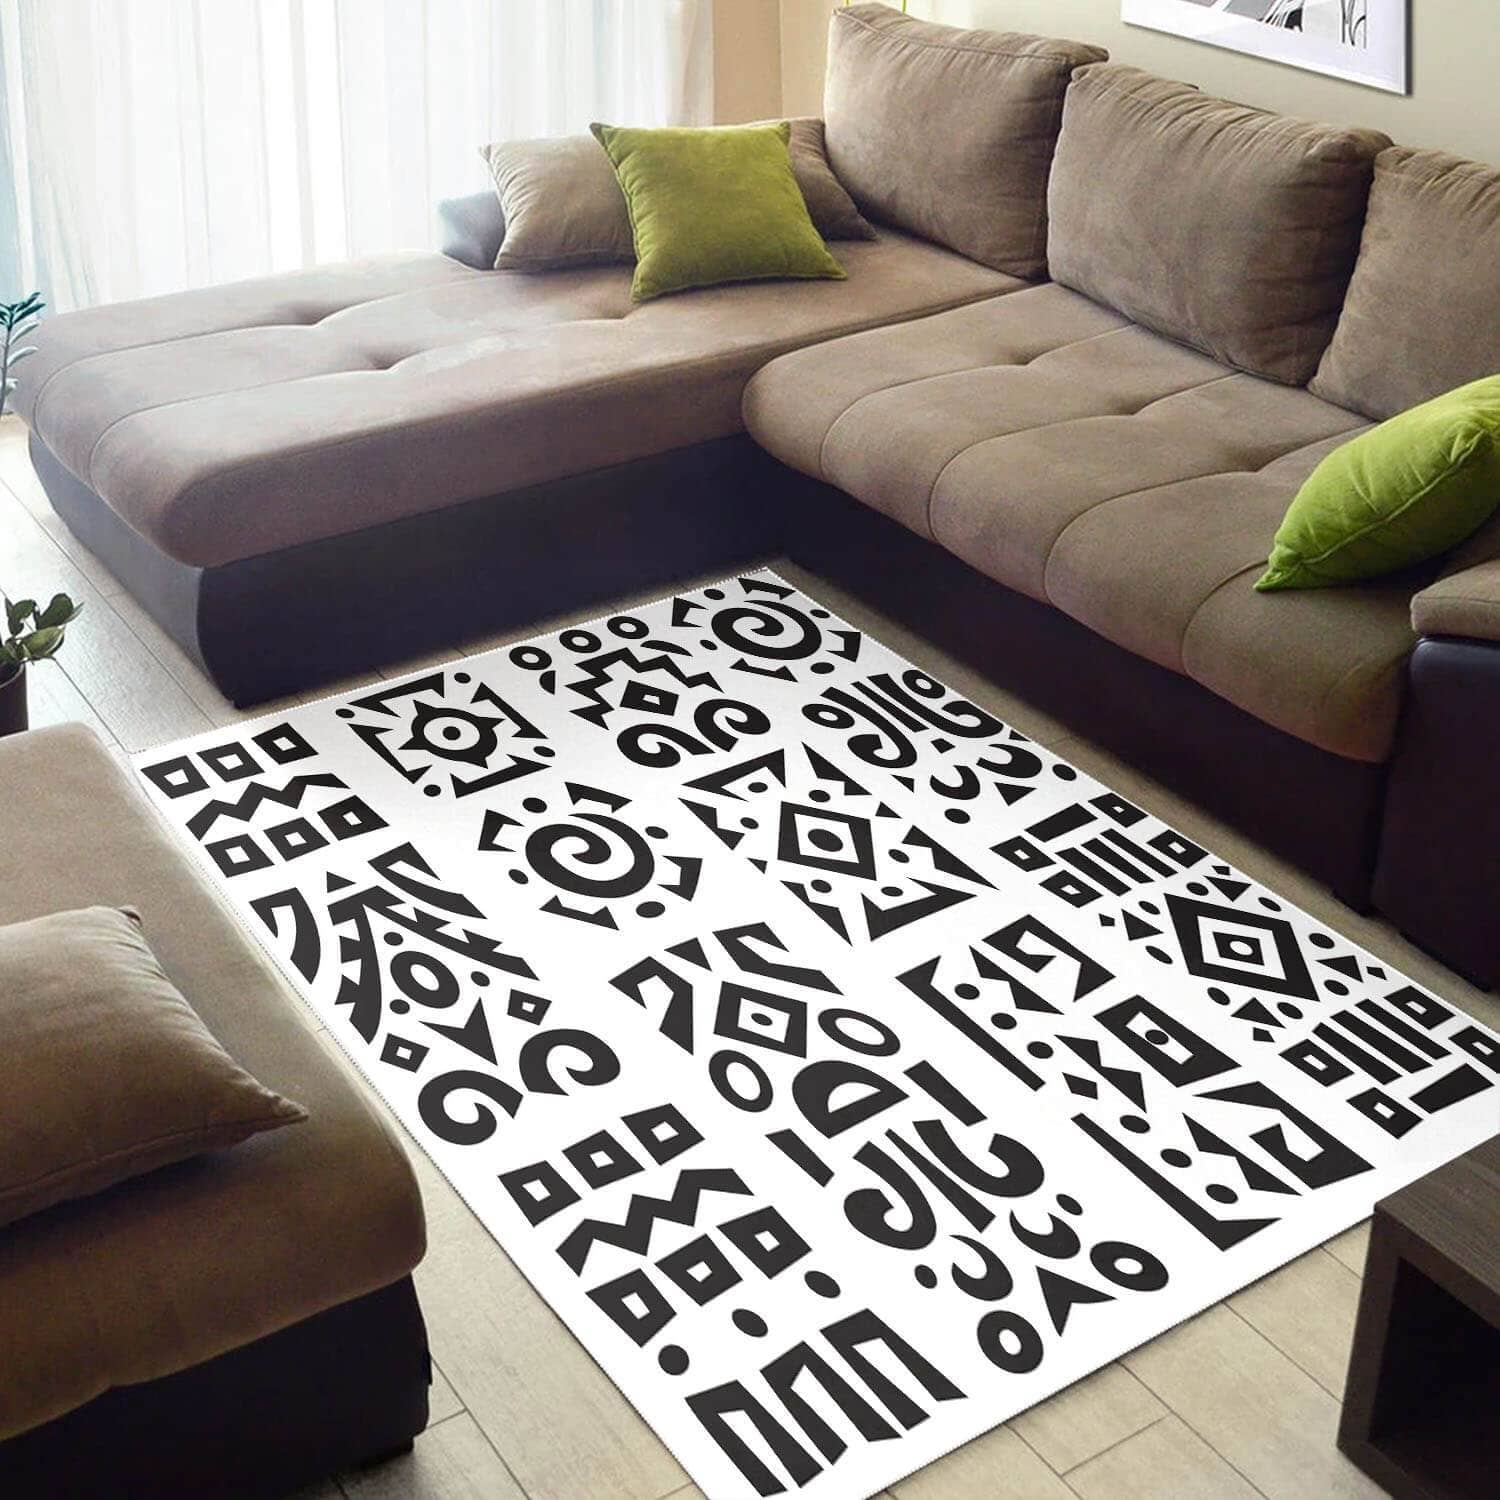 Modern African Awesome Black History Month Afrocentric Pattern Art Style Floor House Rug